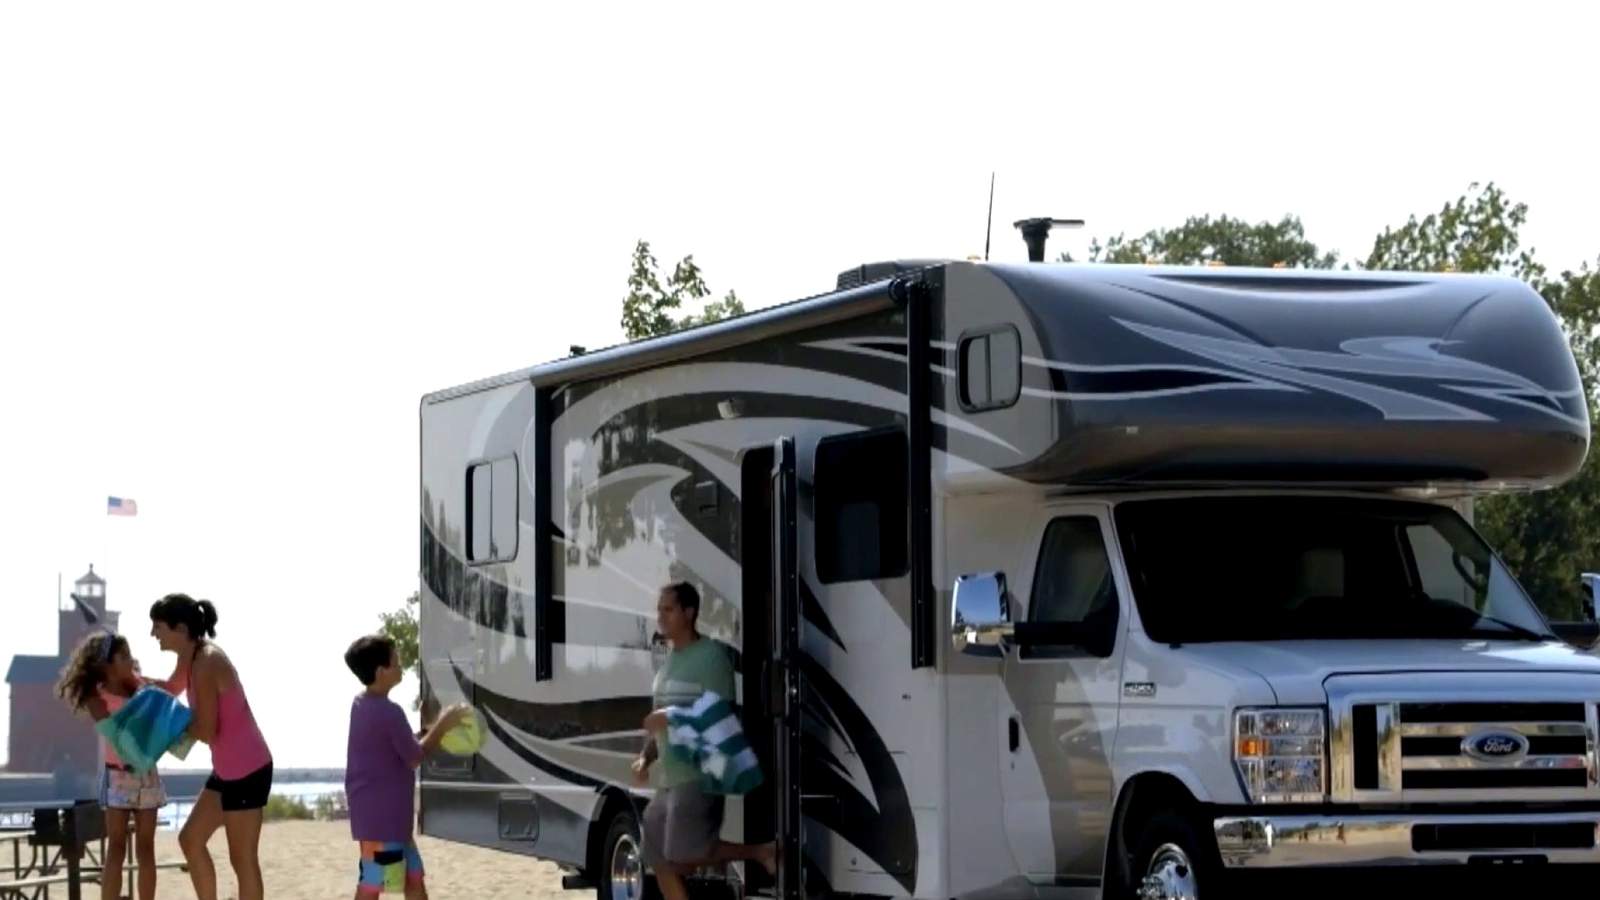 Heres how to vacation in an RV